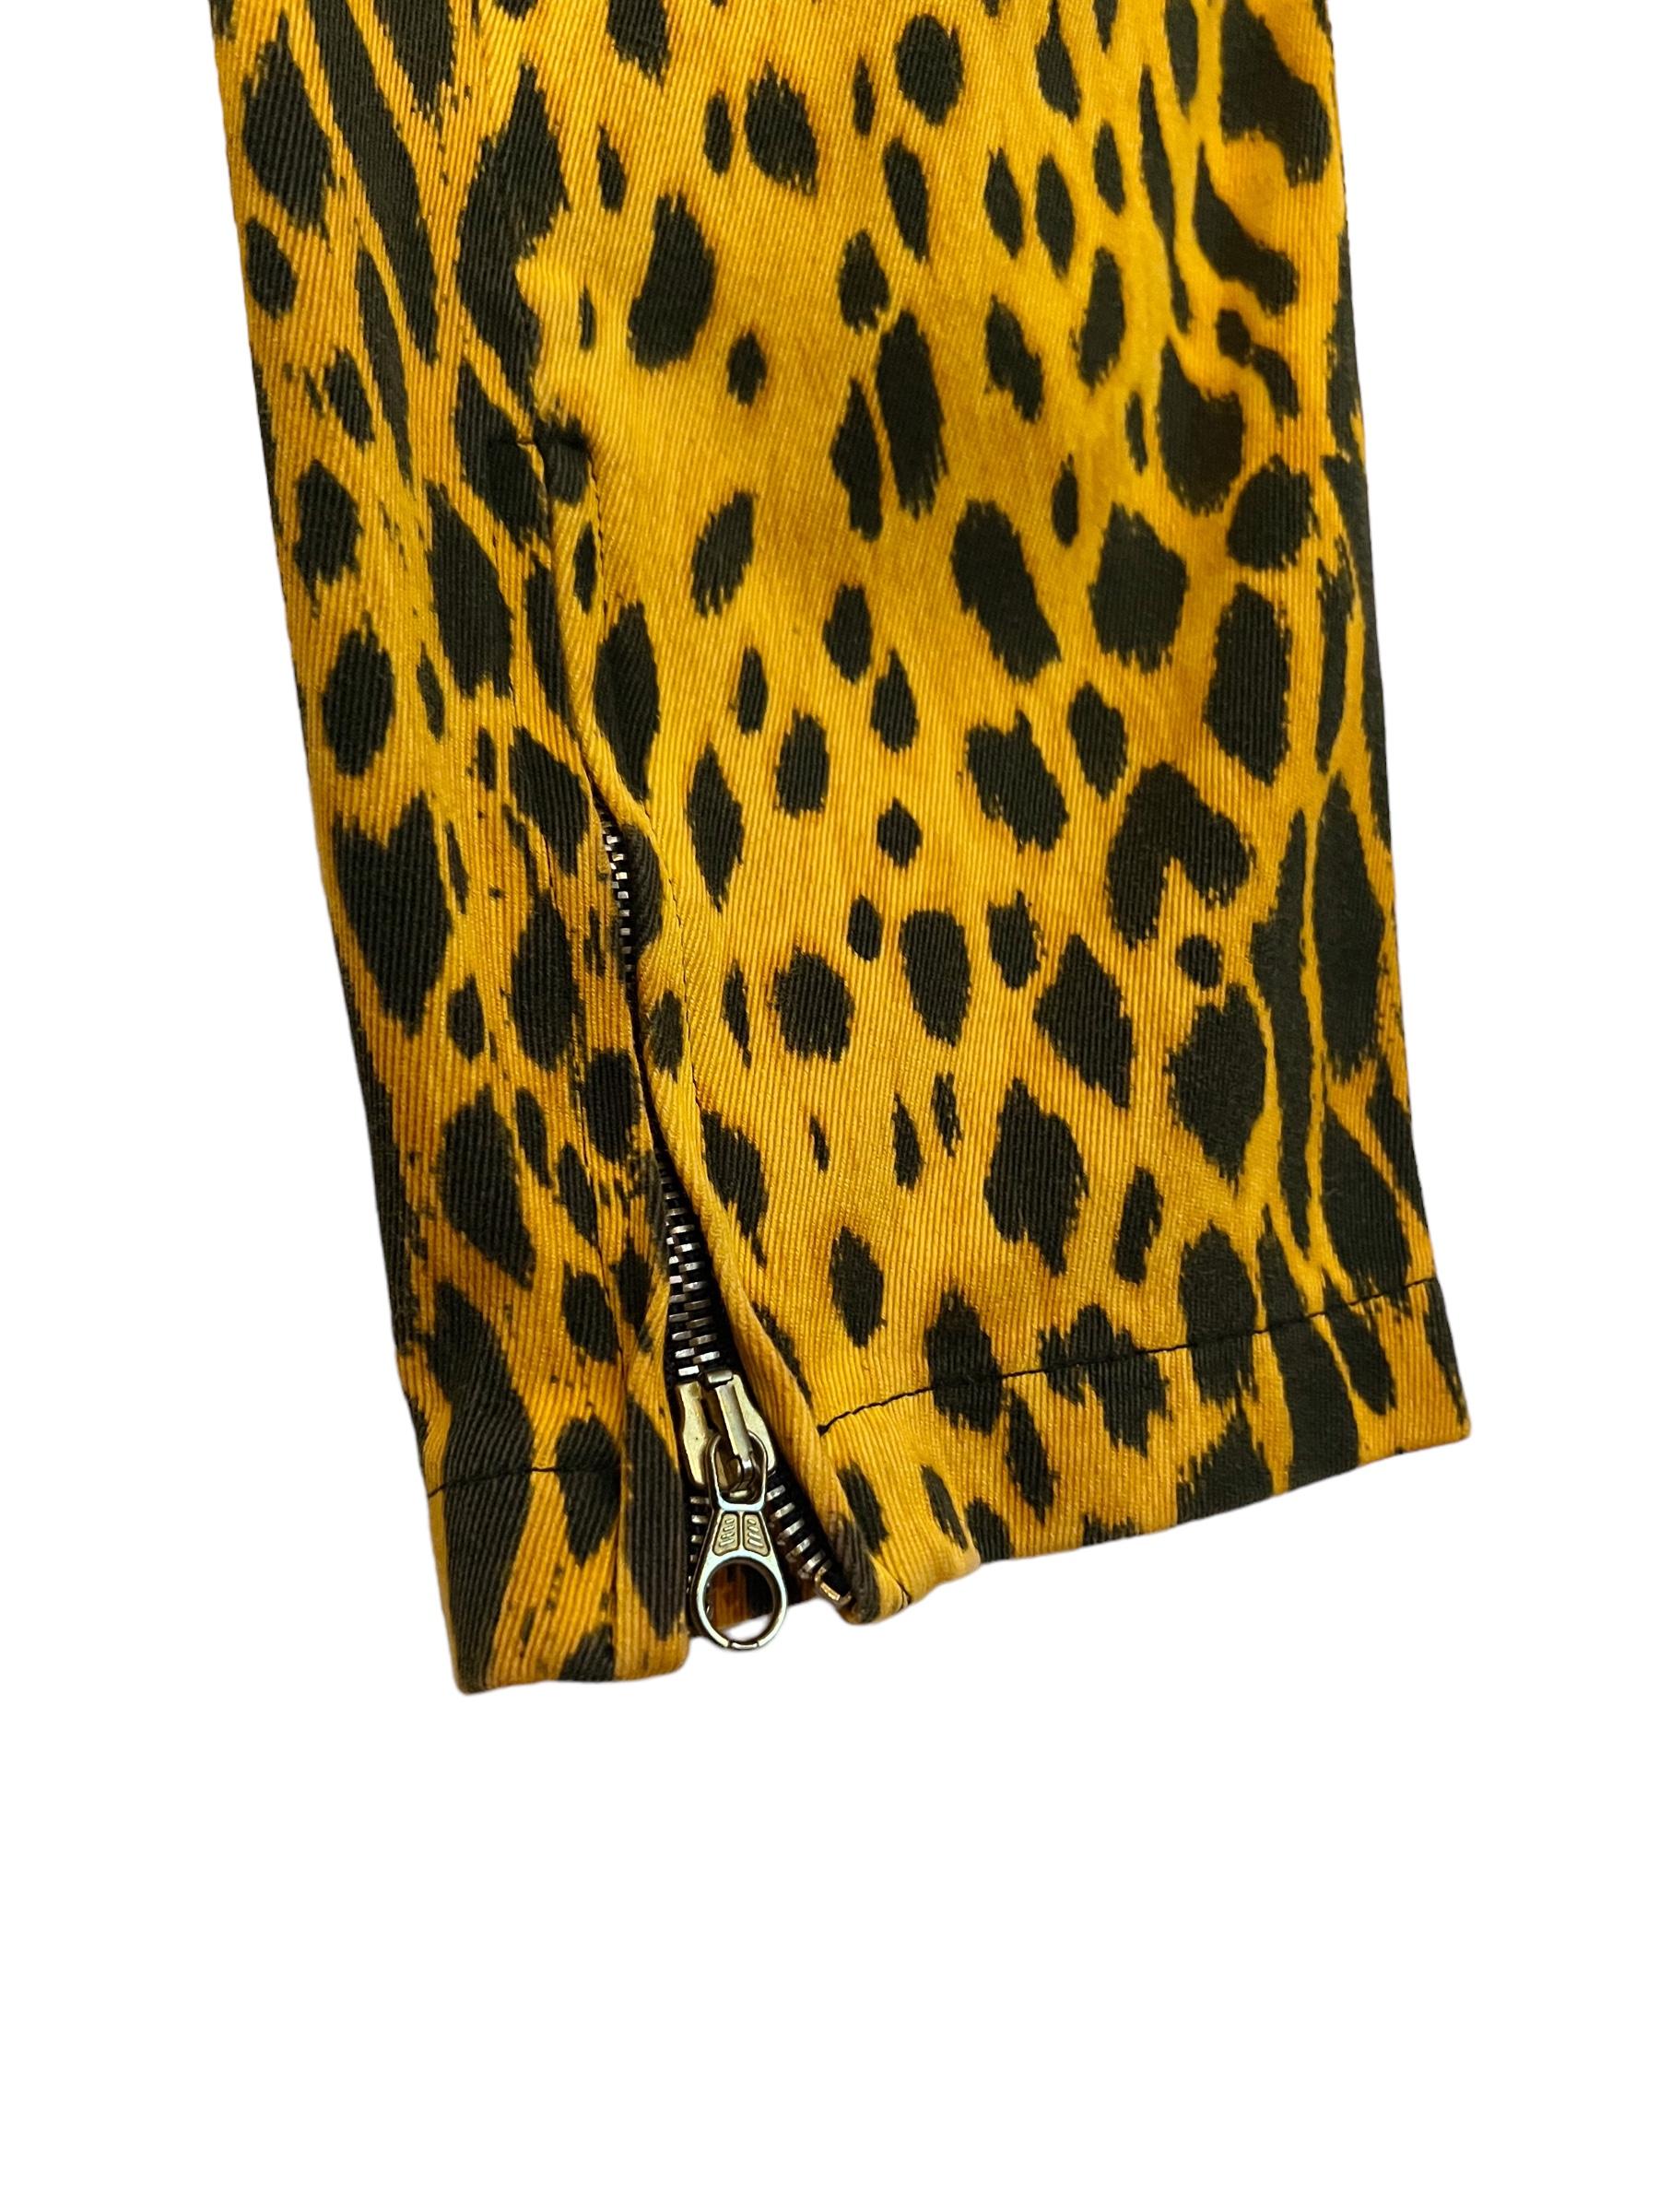 Spring 1992 Gianni Versace Runway Cheetah Leopard High waisted patterned Jeans For Sale 2